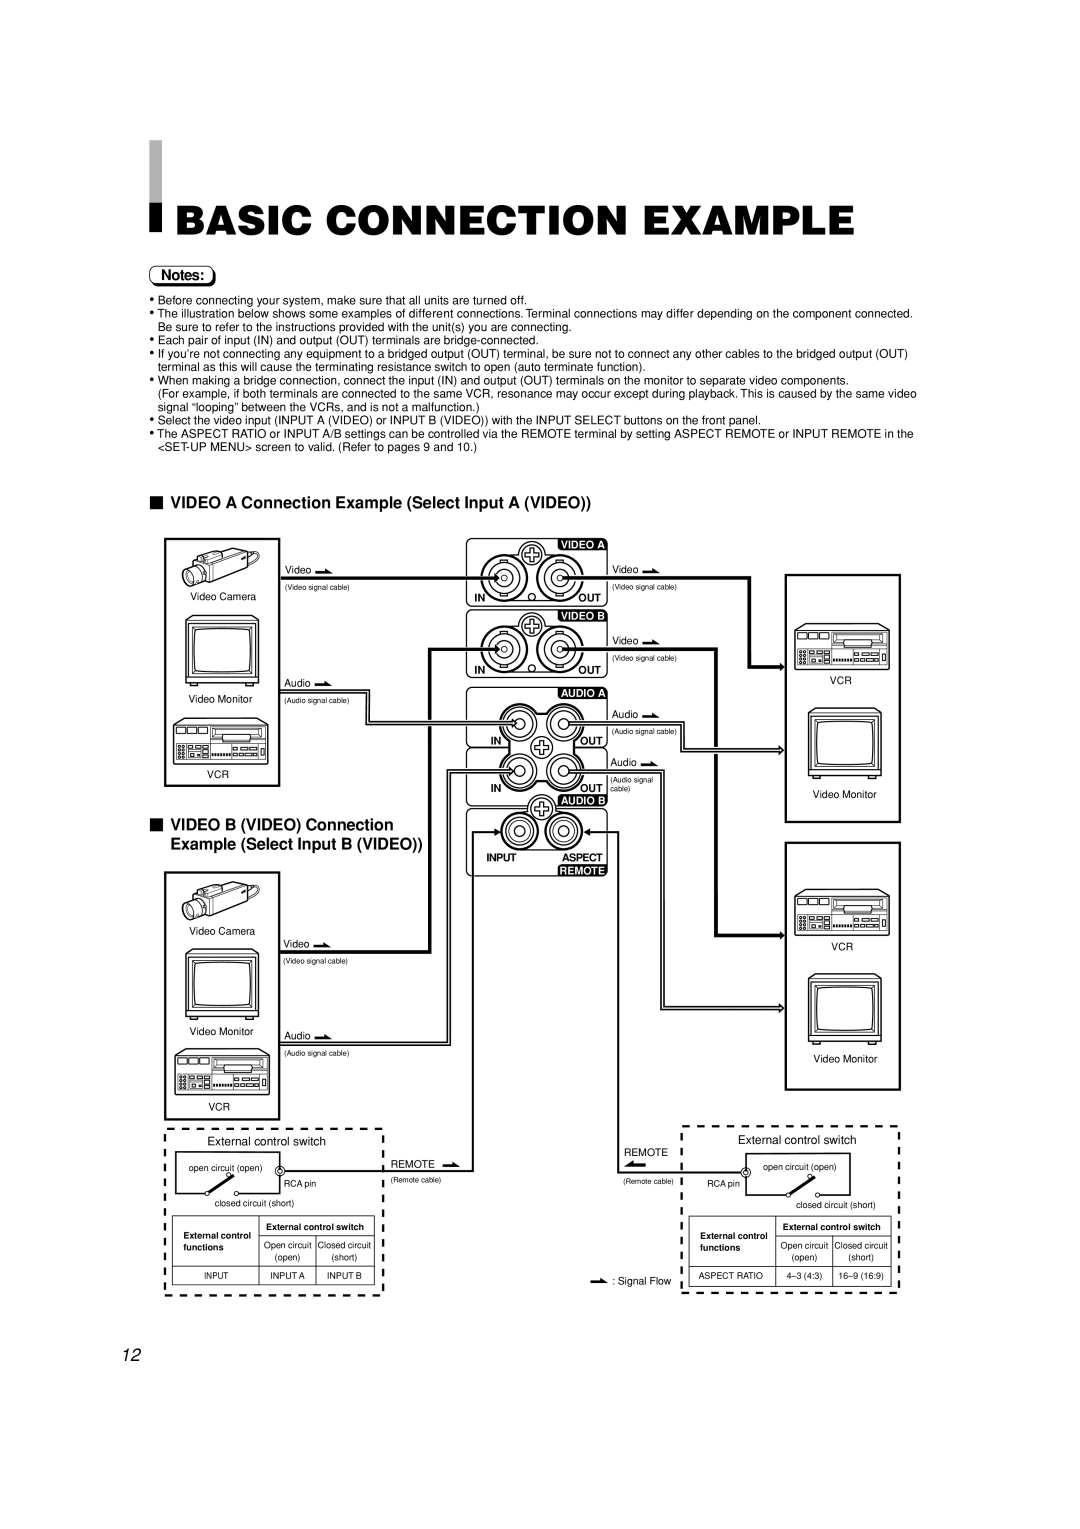 JVC TM-A101G manual Basic Connection Example,  VIDEO A Connection Example Select Input A VIDEO,  VIDEO B VIDEO Connection 